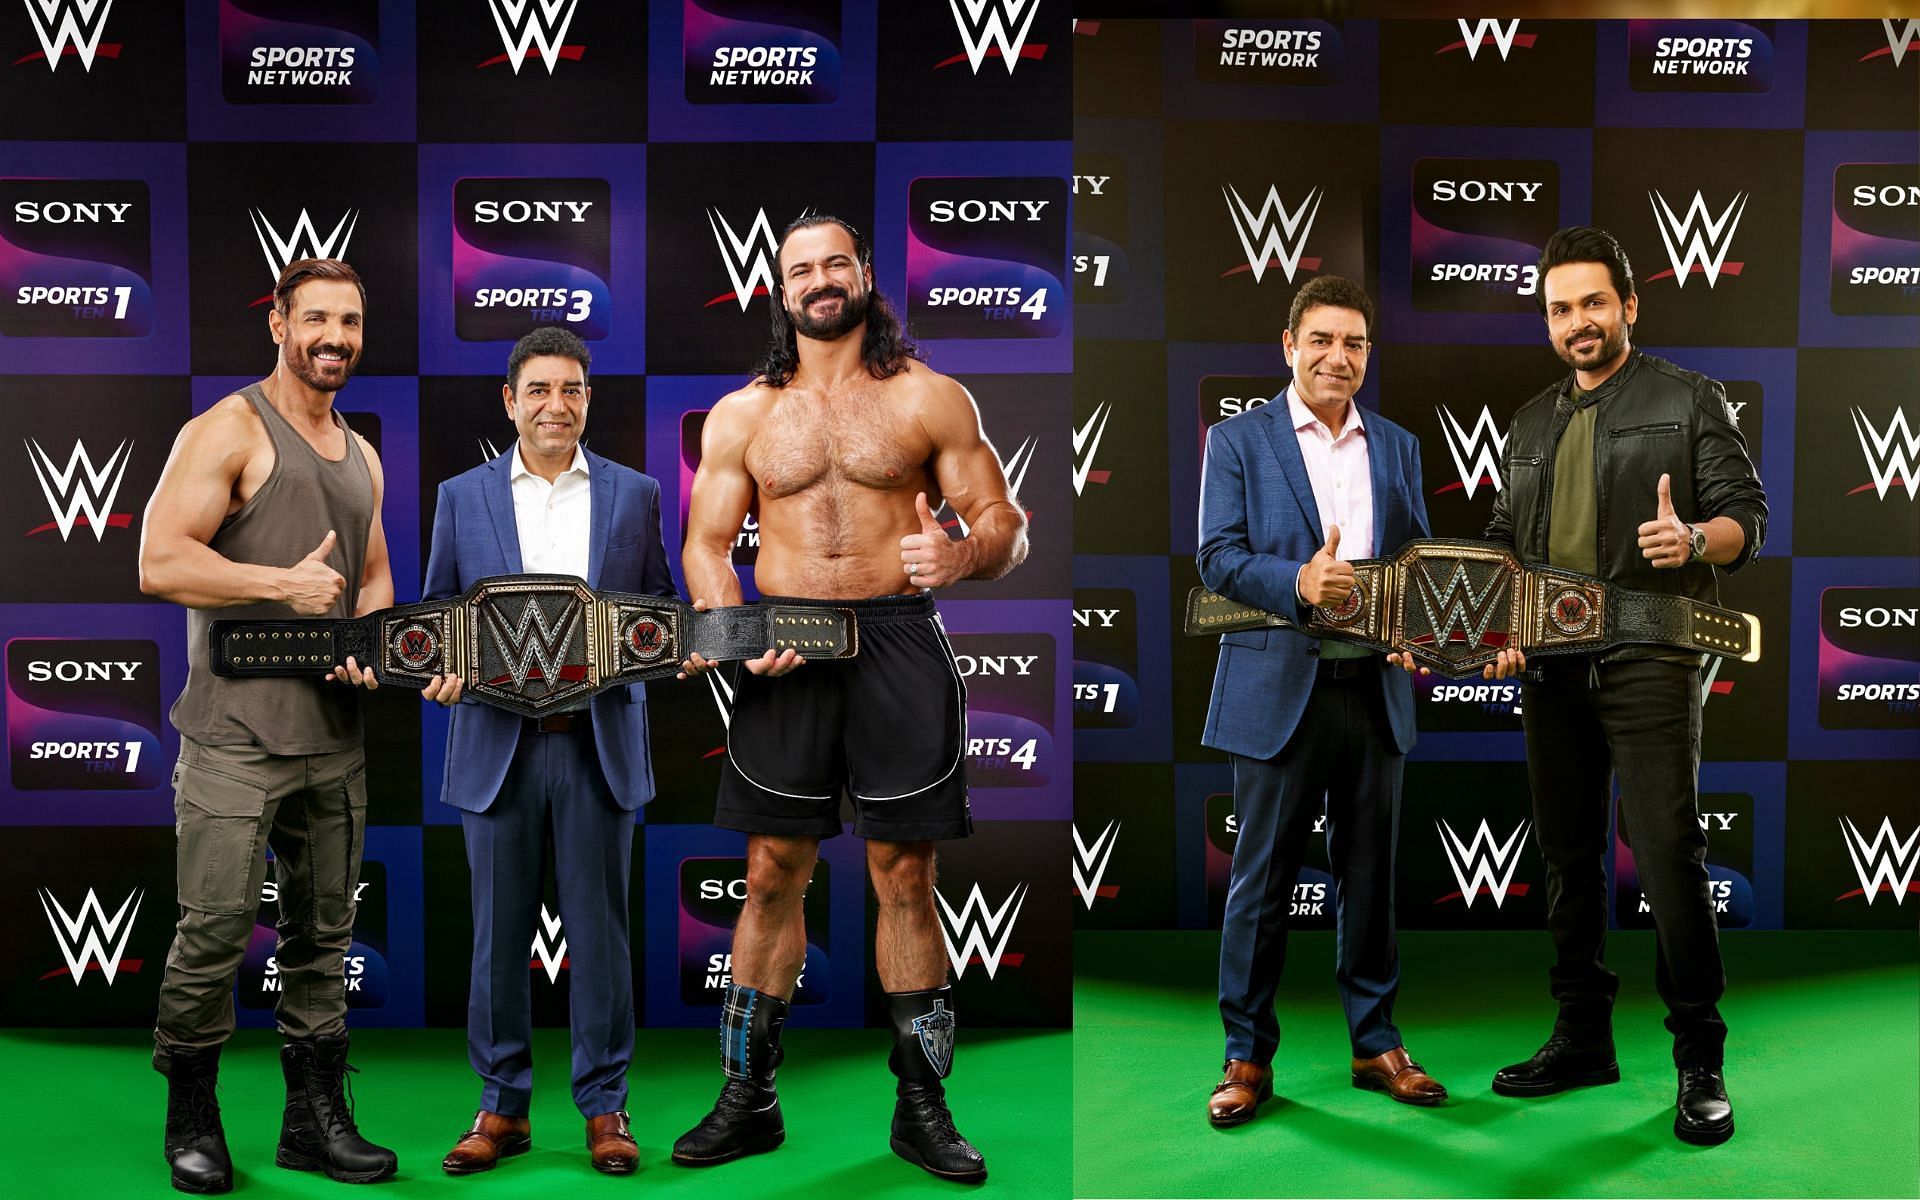 WWE Superstar Drew McIntyre took part in an immense campaign with John Abraham and Karthi